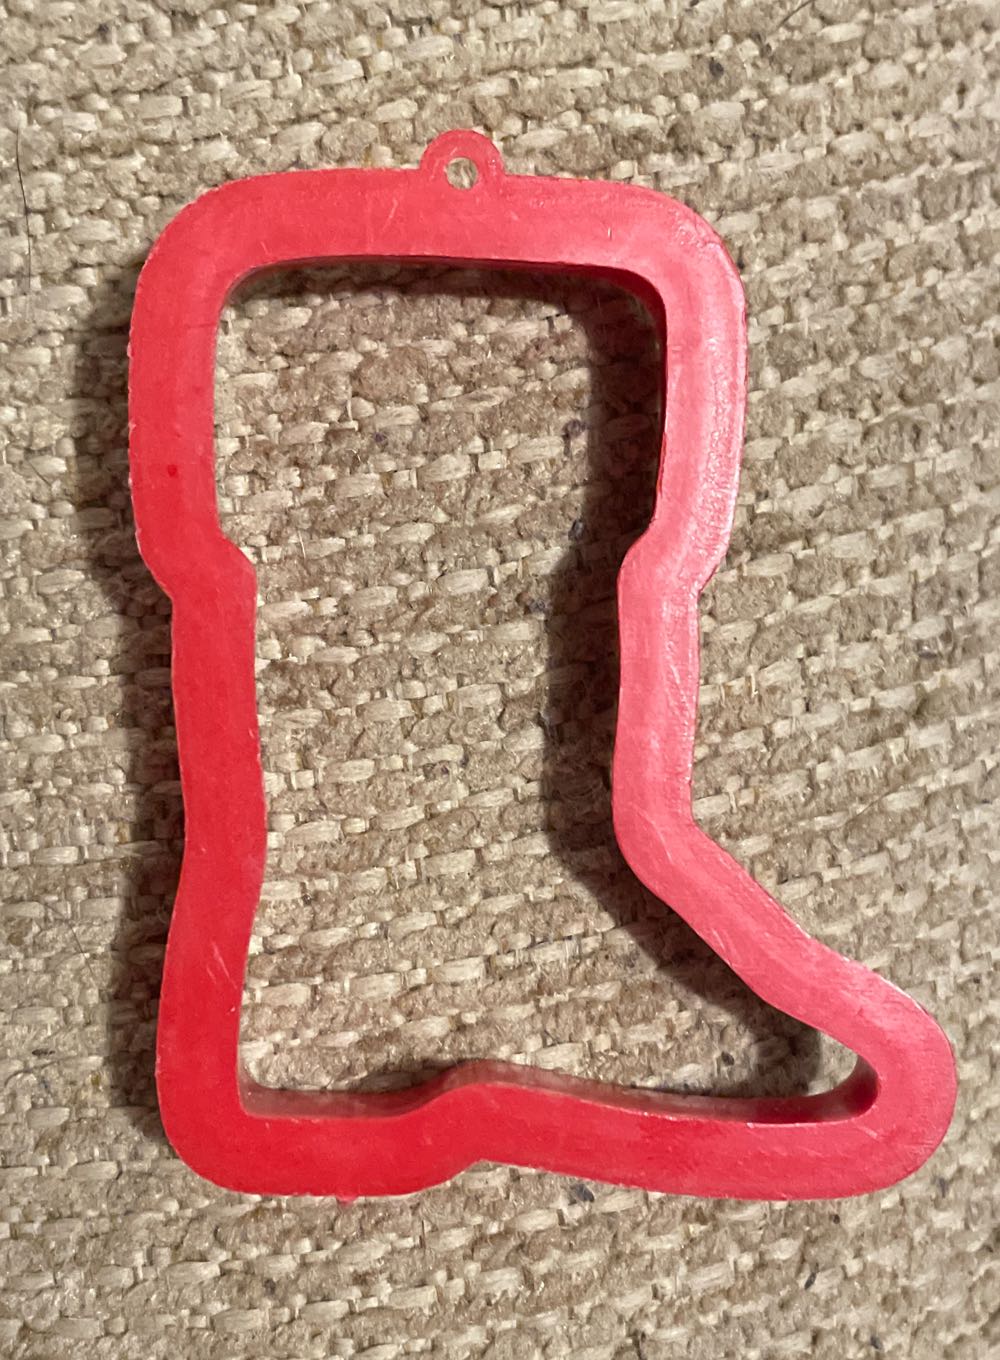 Cookie Cutter - Boot - Plastic - Red - Boot (Cookie Cutter) ornament collectible - Main Image 1